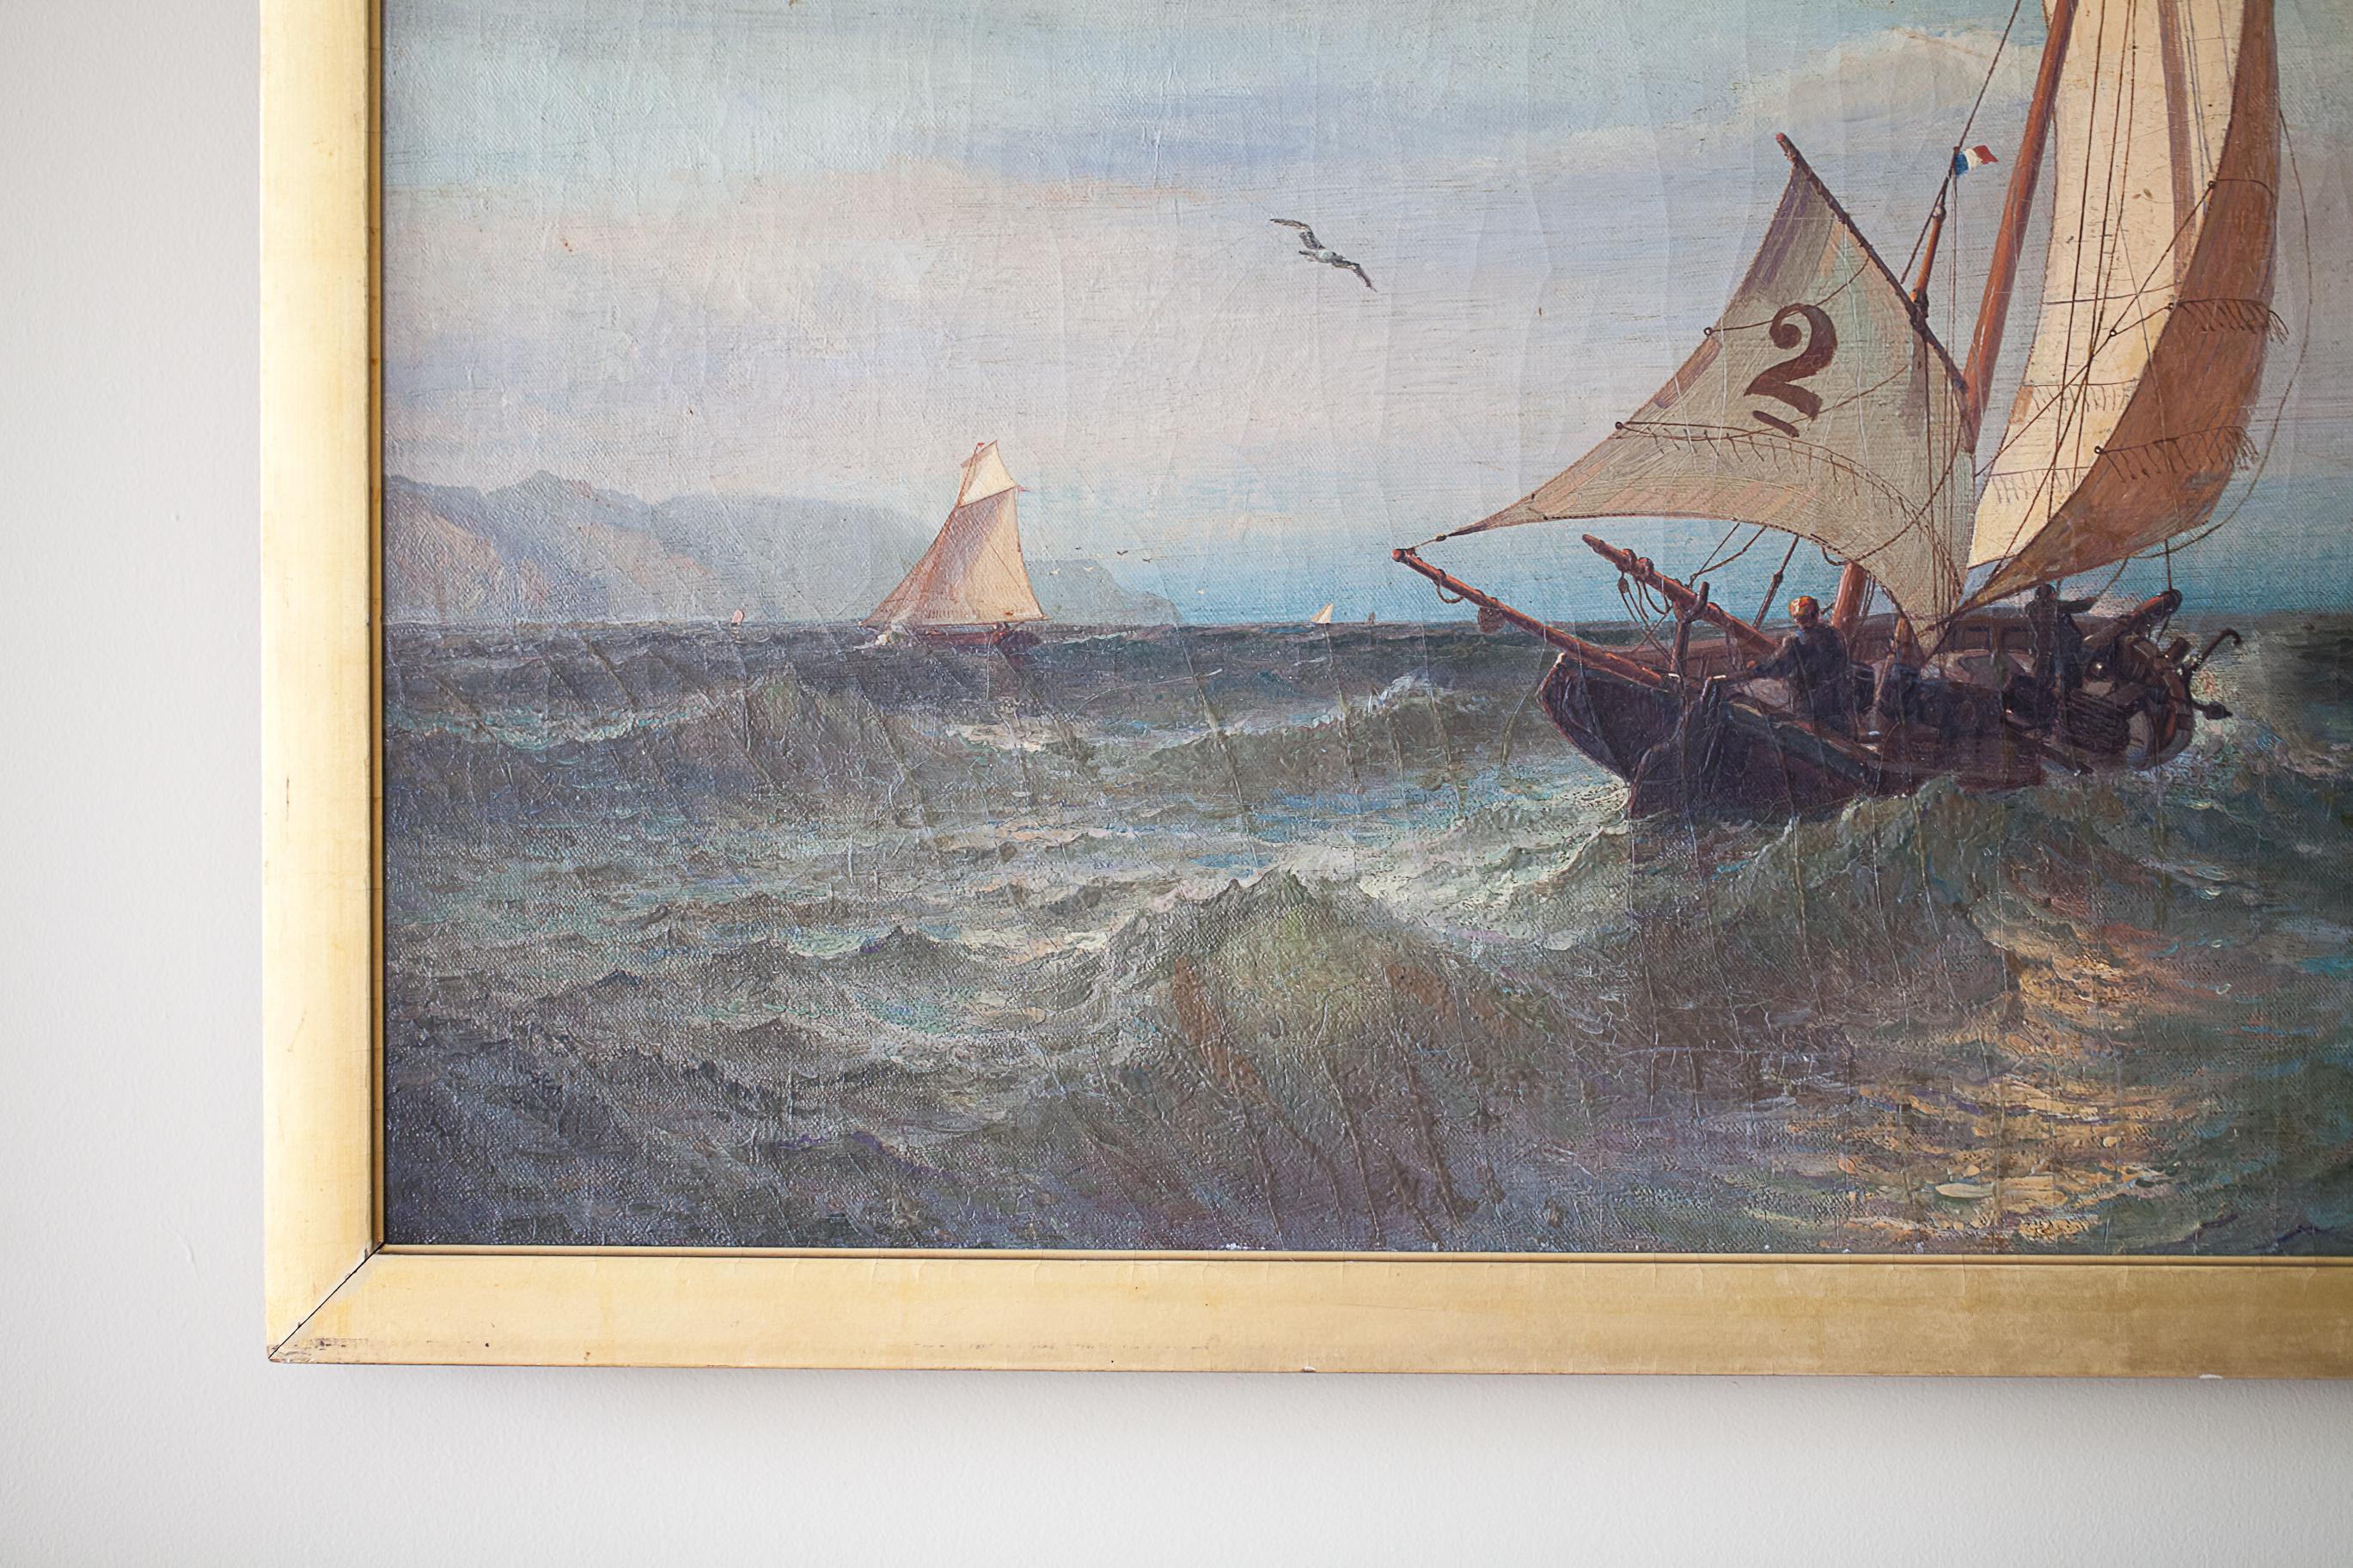 Painted Oil on Canvas of a Regatta on a Choppy Sea, Julian O. Davidson, Dated 1877 For Sale